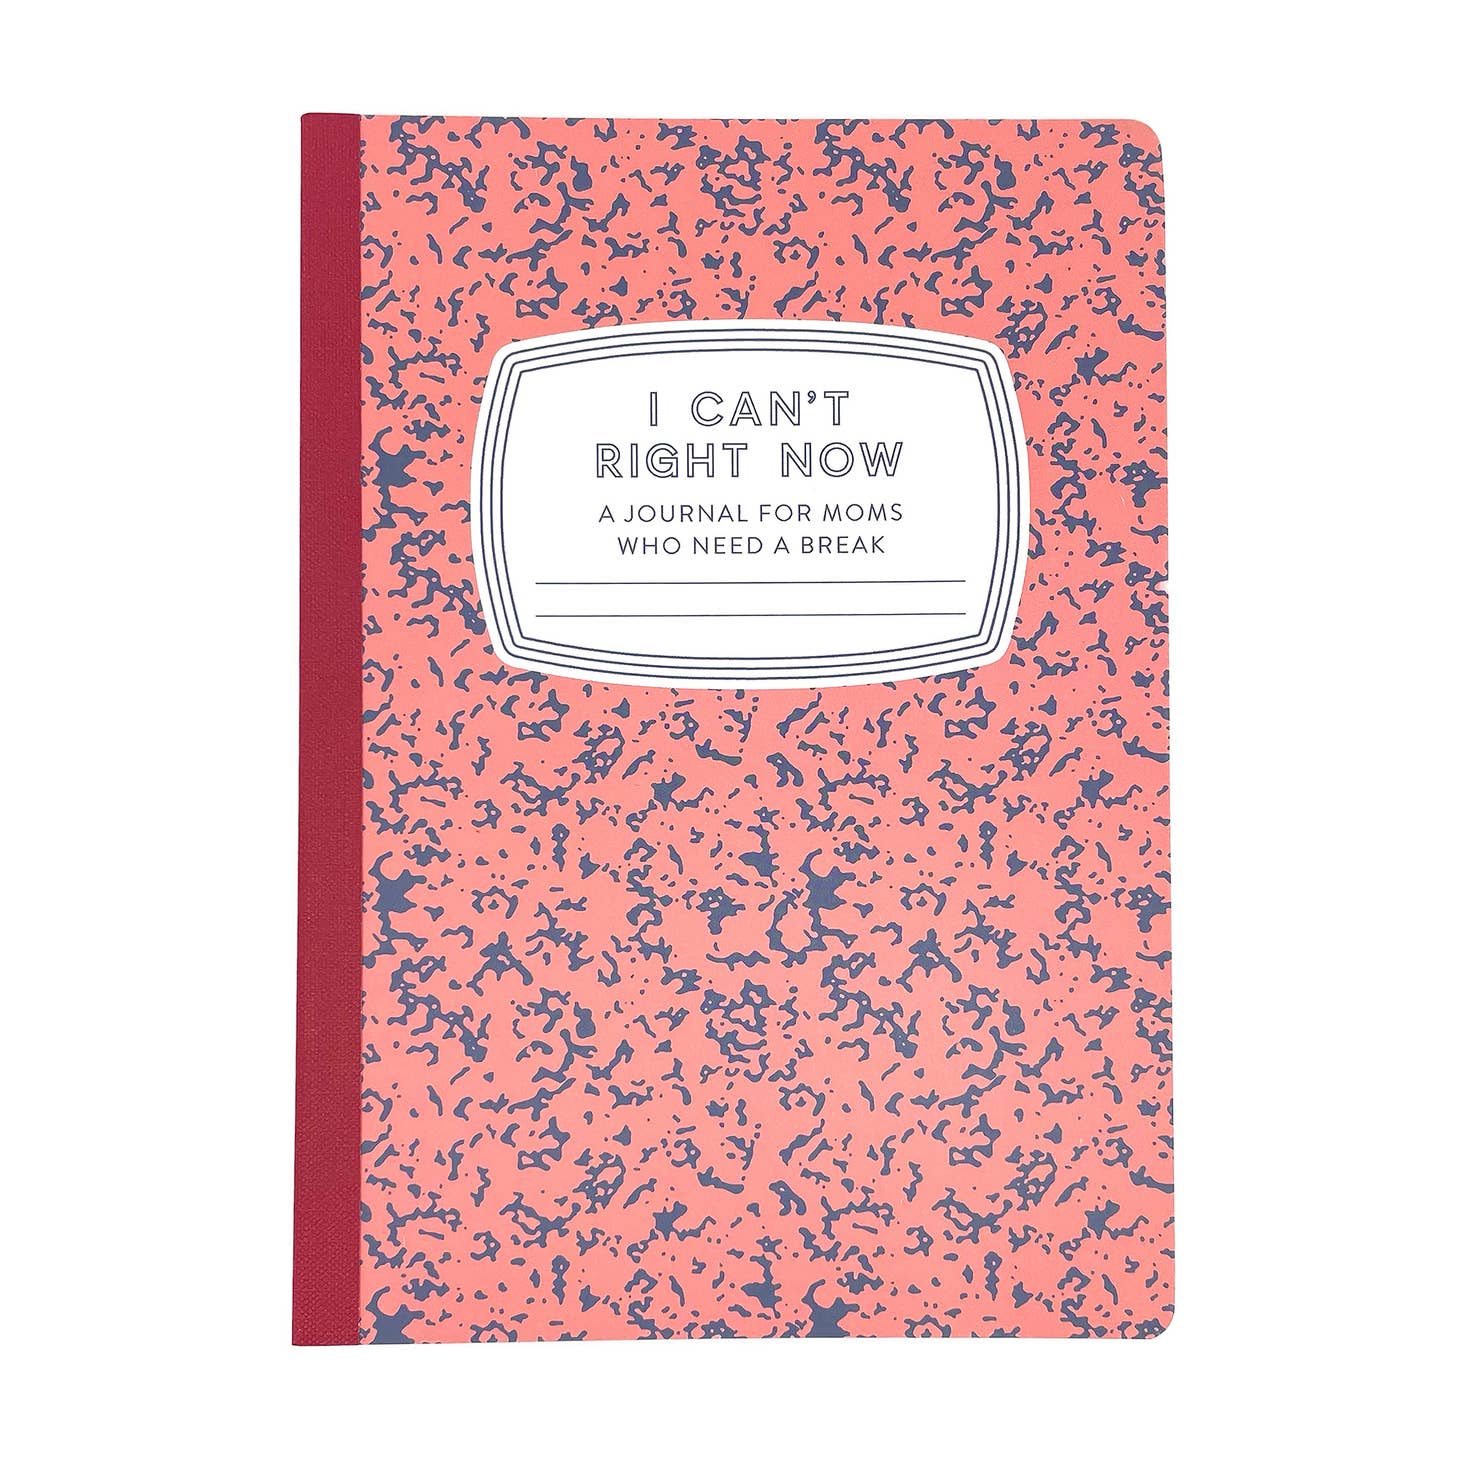 Pink and blue marbled background with white box with black text says, "I can't right now, a journal for moms who need a break" with red binding. 